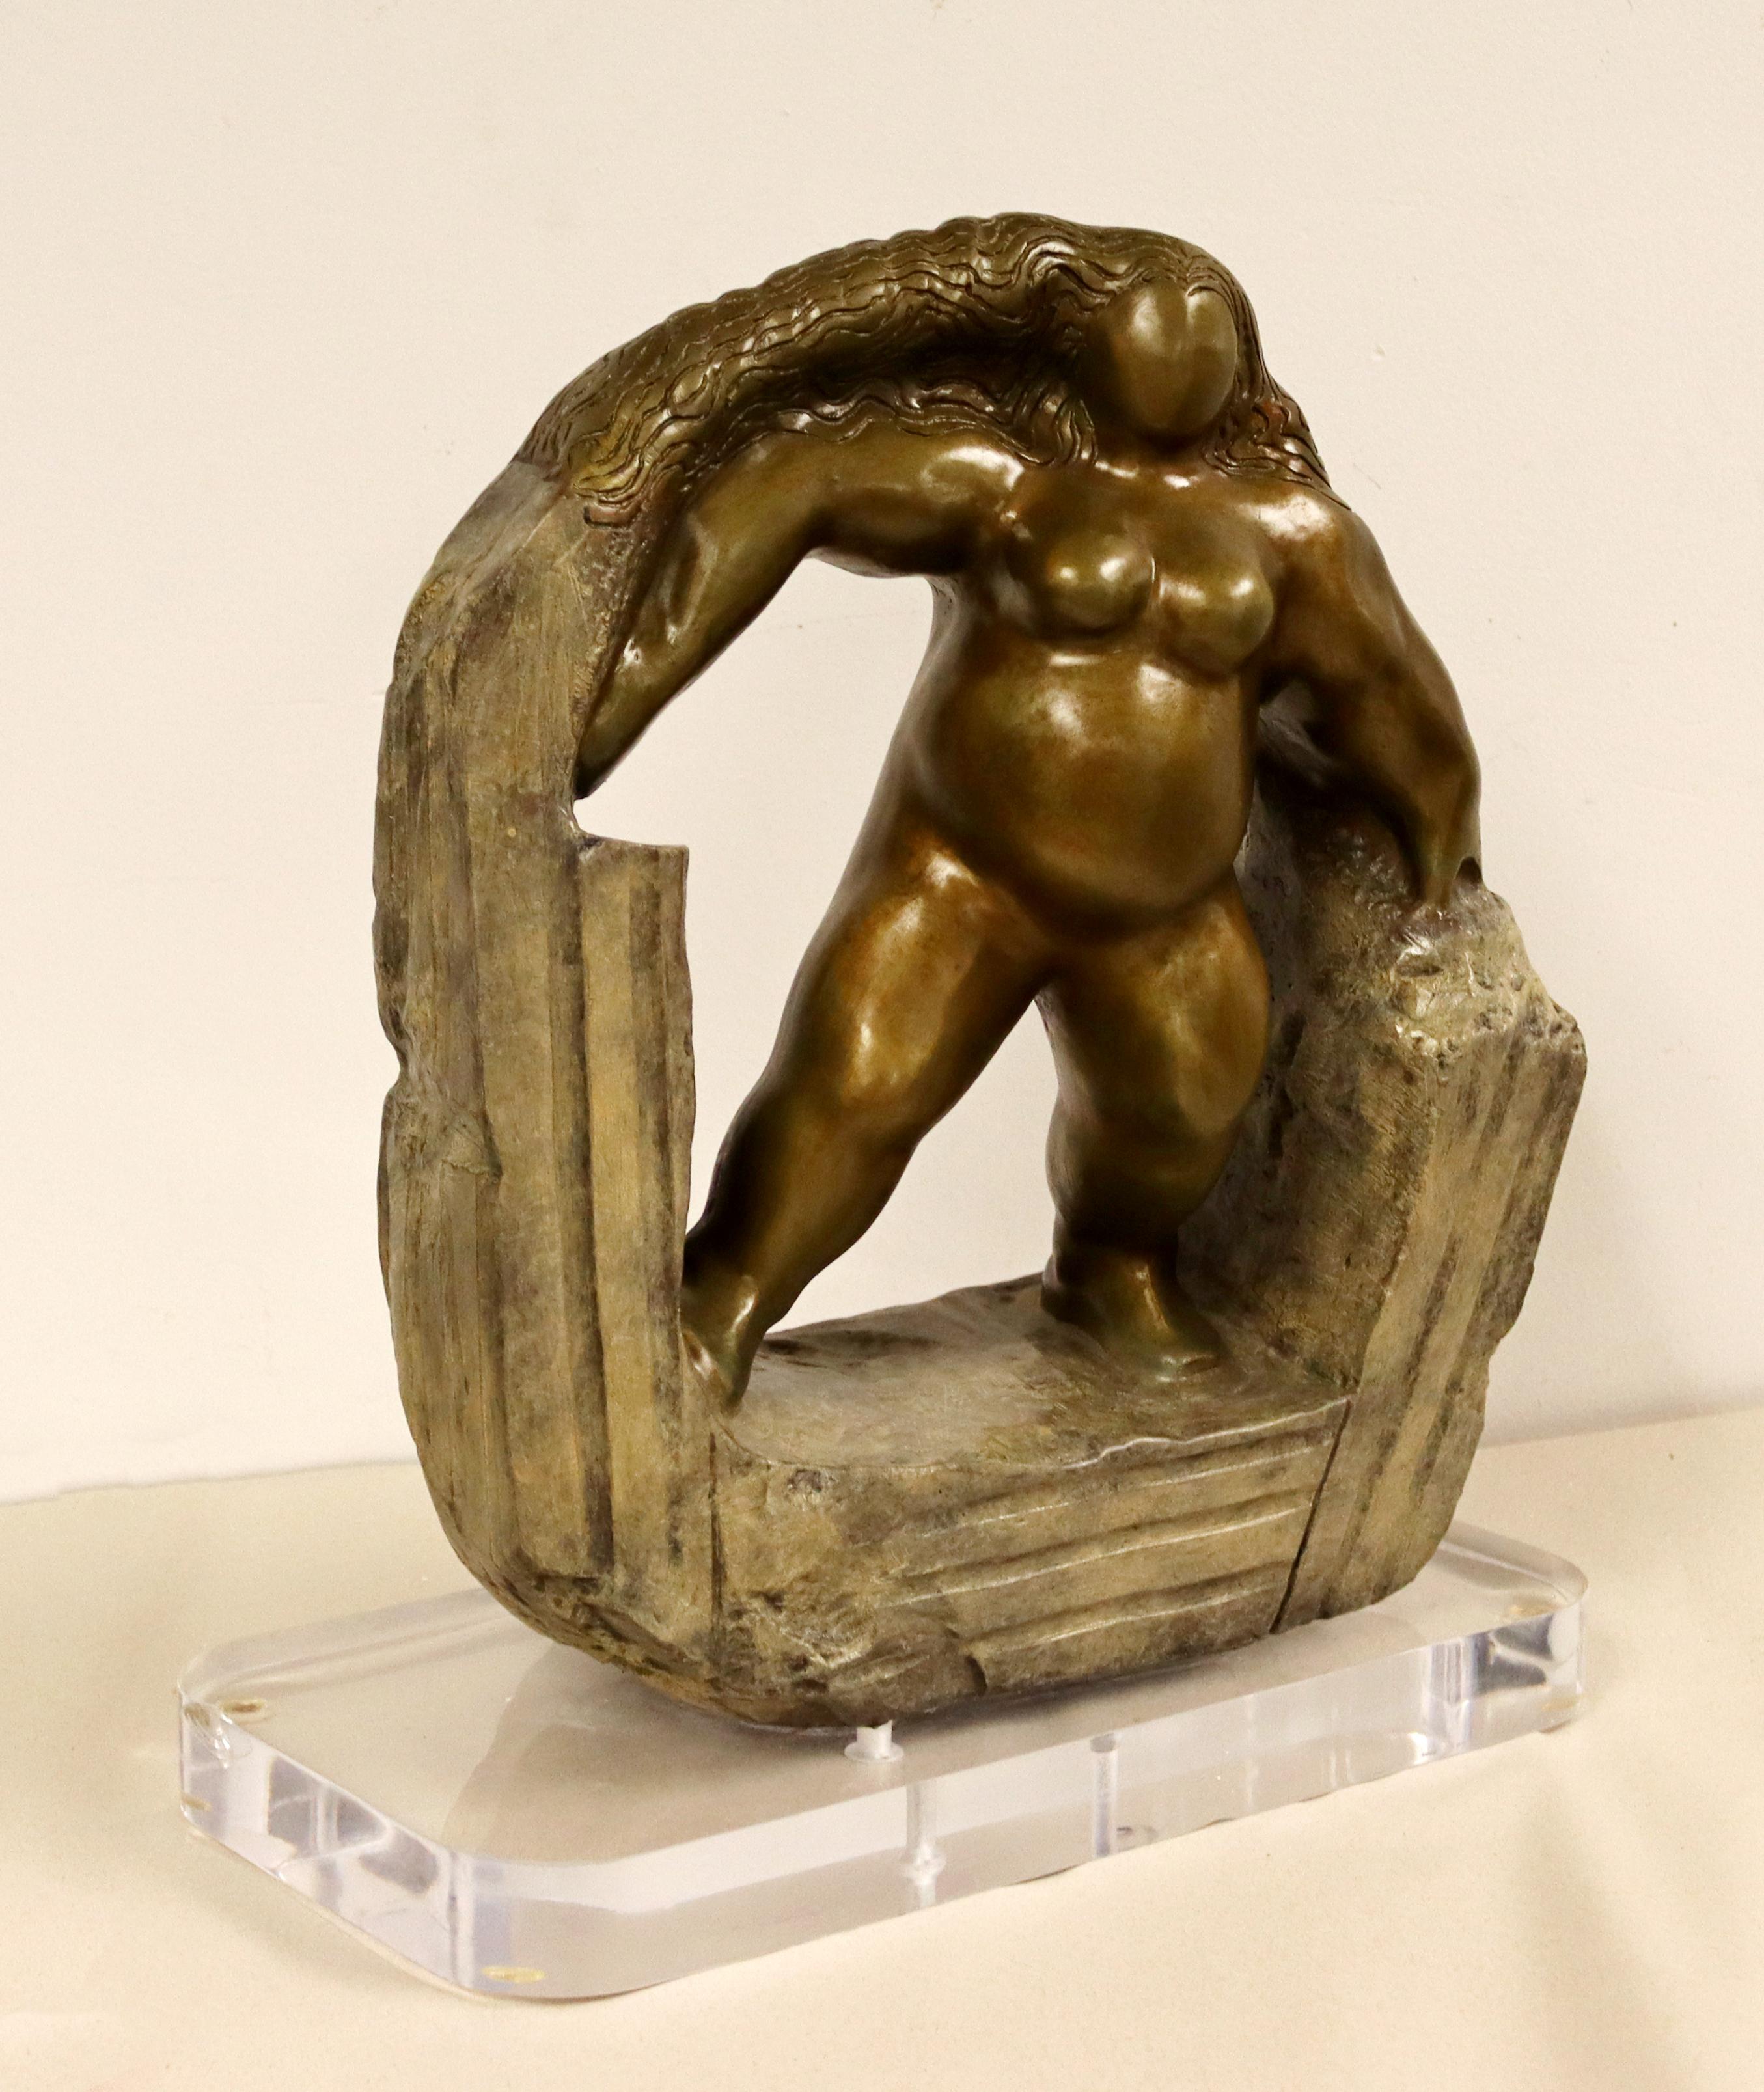 For your consideration is a marvelous, bronze table sculpture, on an acrylic lucite base, depicting a nude woman, 